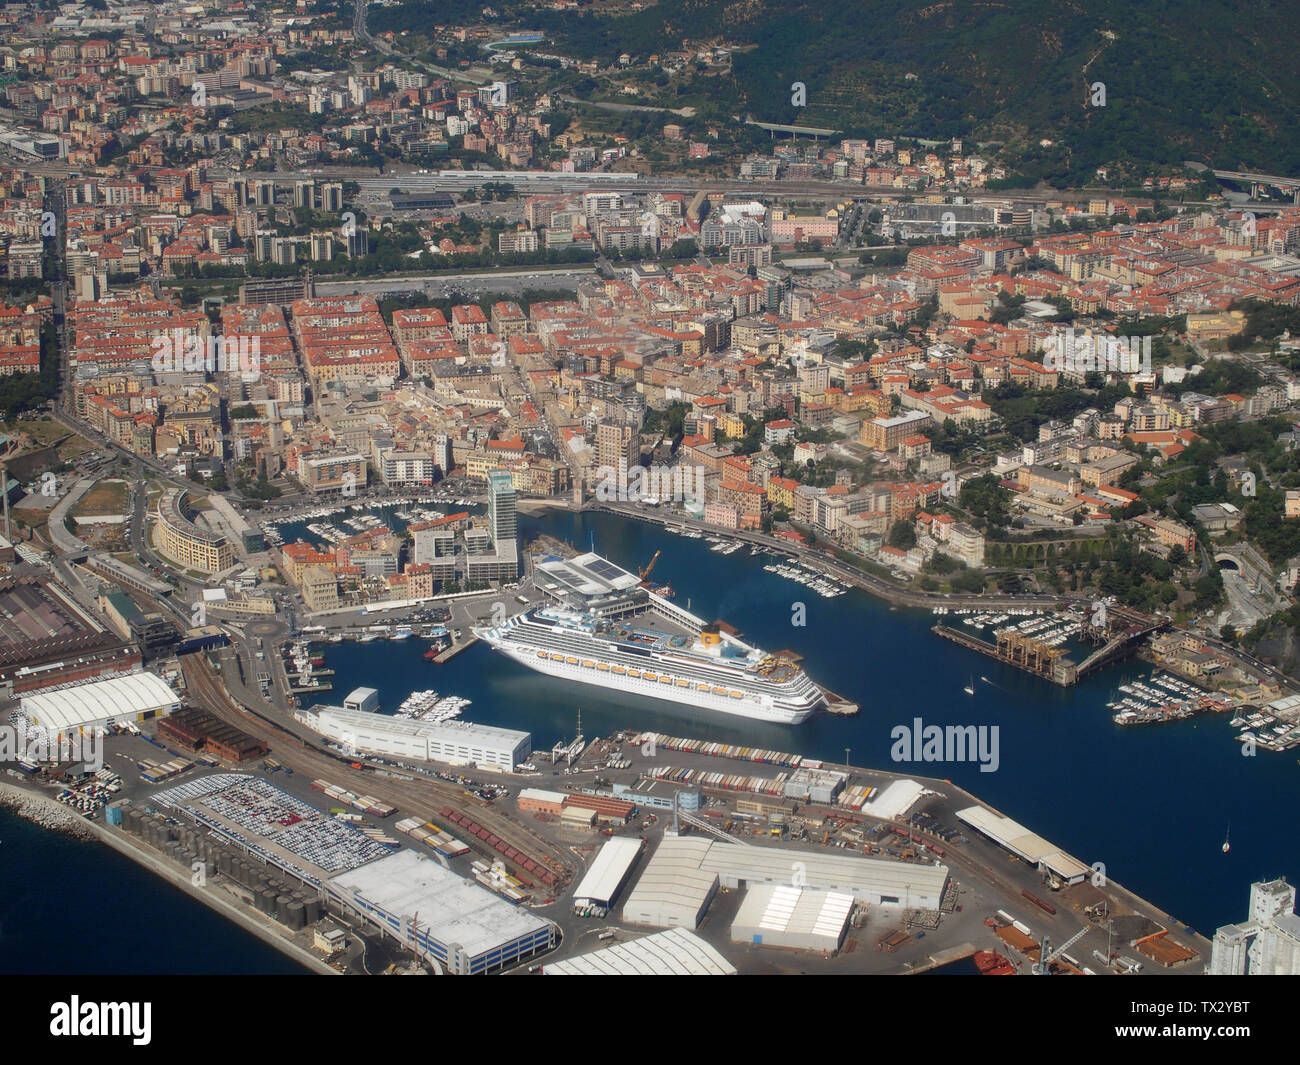 Aerial view of the Port of Savona, with docks and the cruise ship Costa Fascinosa on anchor at the Palacrociere Terminal in the "Darsena Nuova". Stock Photo